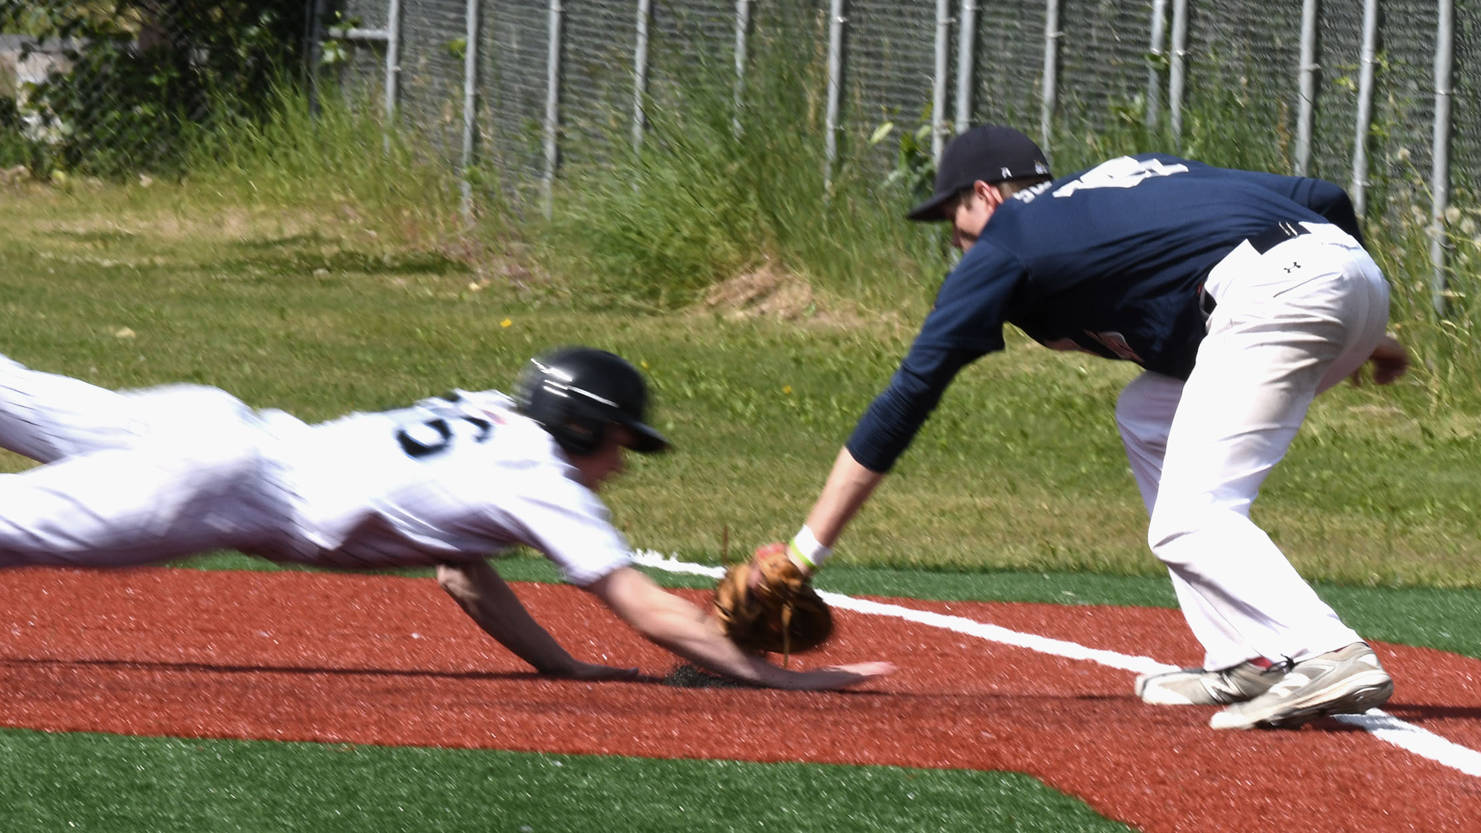 Juneau Post 25’s Bryce Swofford tags out a Chugiak base runner on Sunday, June 25, at Oberg Field in Chugiak. (Photo courtesy of Jeremy Ludeman)